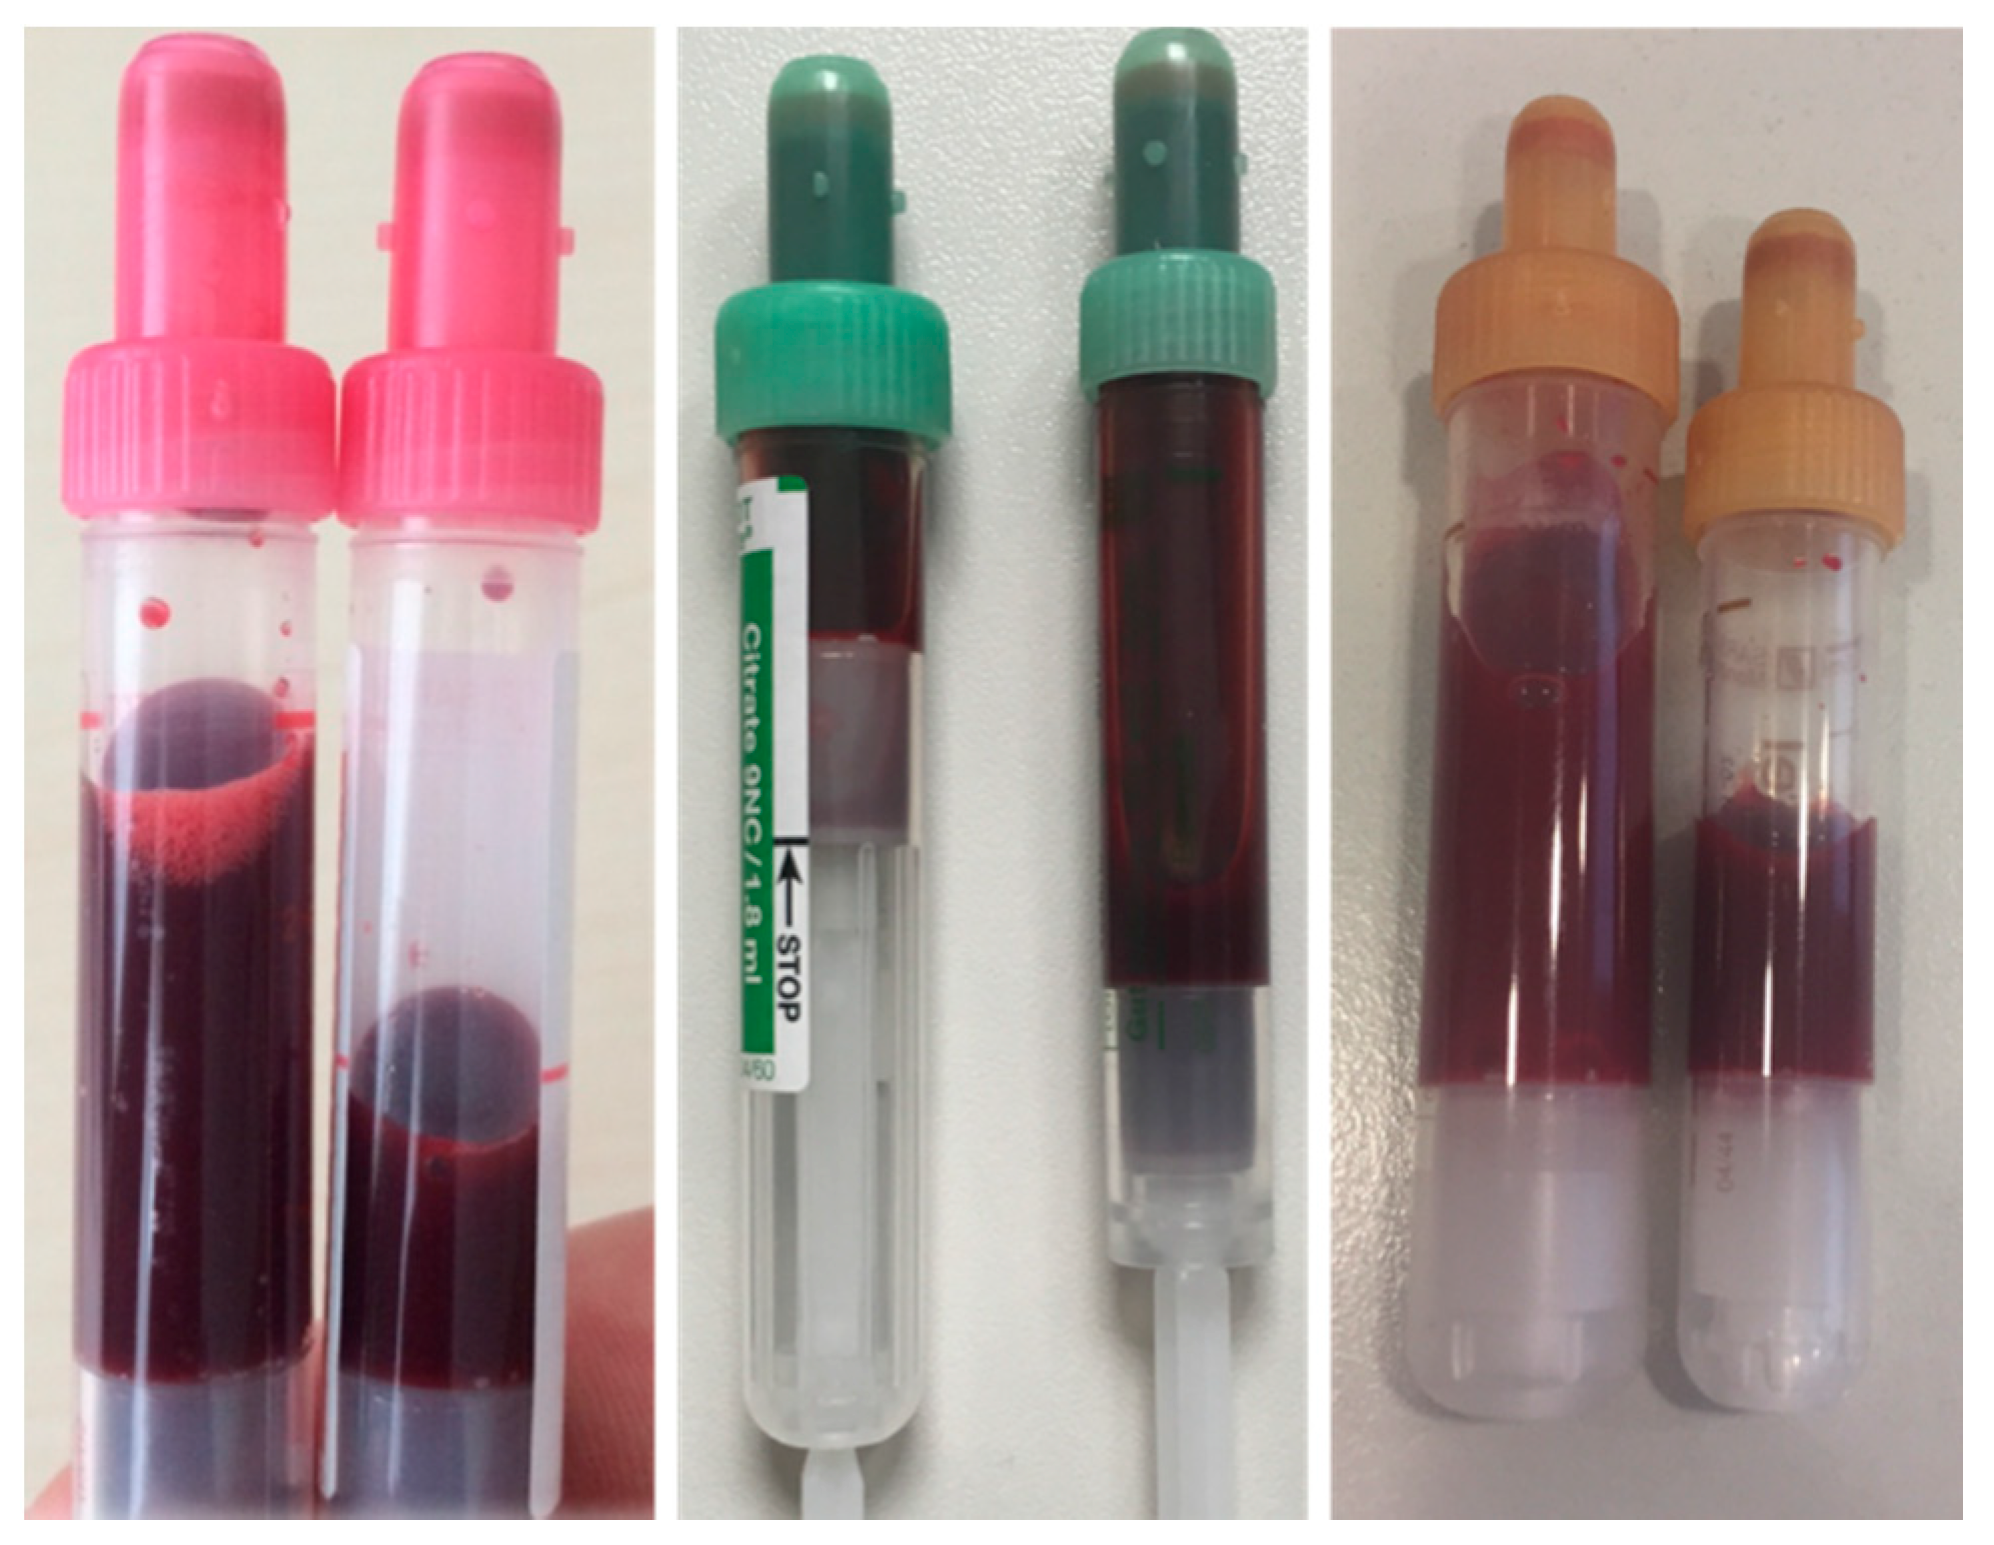 Big Blood Savings: Large Trial Shows Taking Less Blood for Lab Testing Reduces Transfusions in Intensive Care